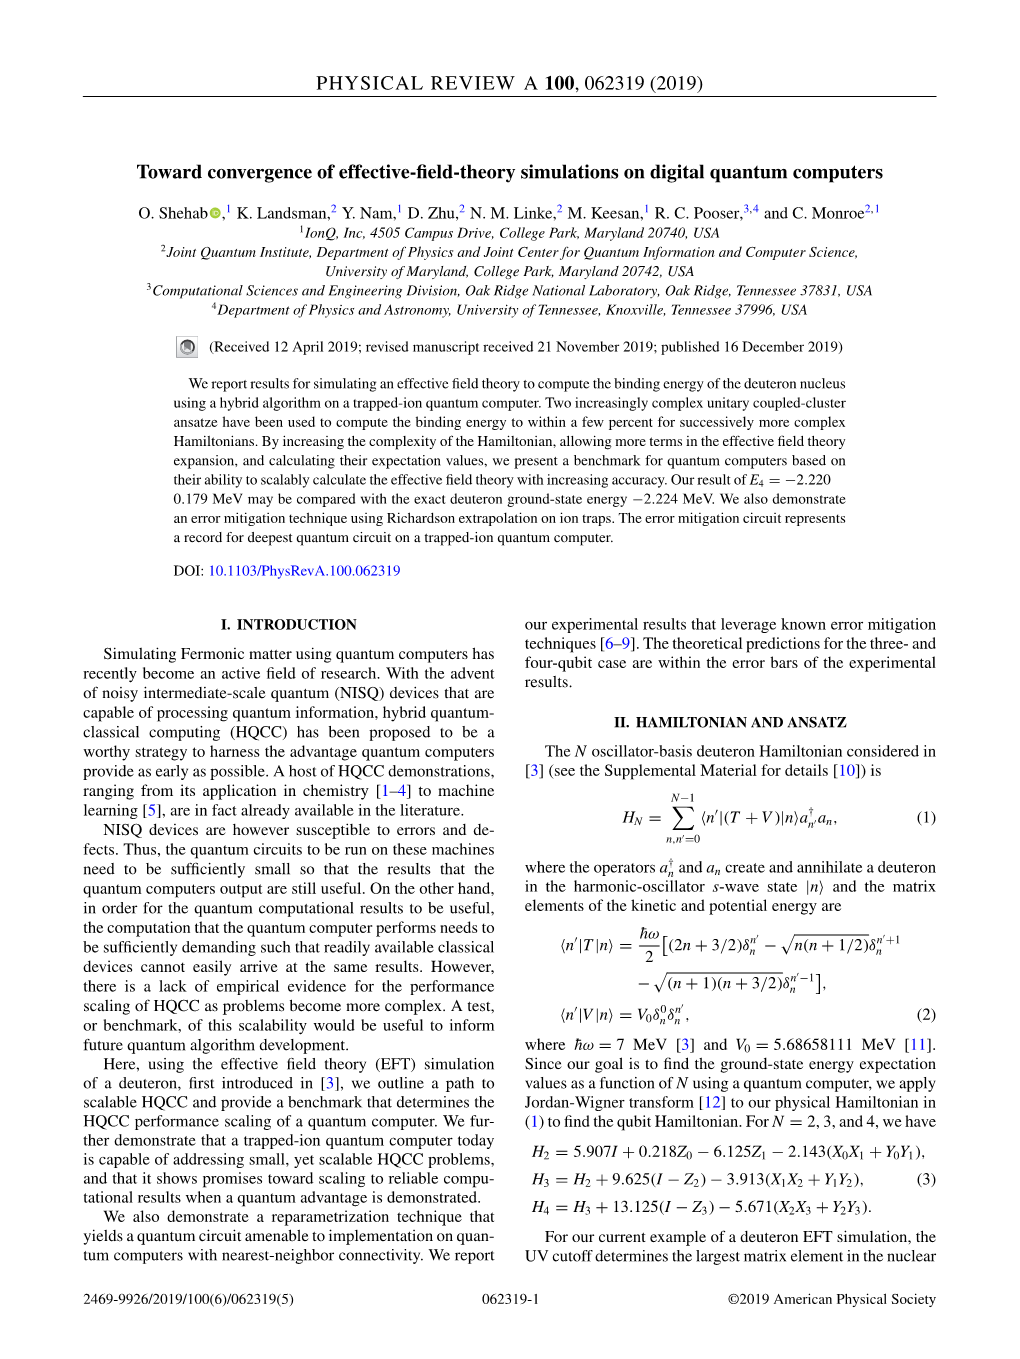 (2019) Toward Convergence of Effective-Field-Theory Simulations On